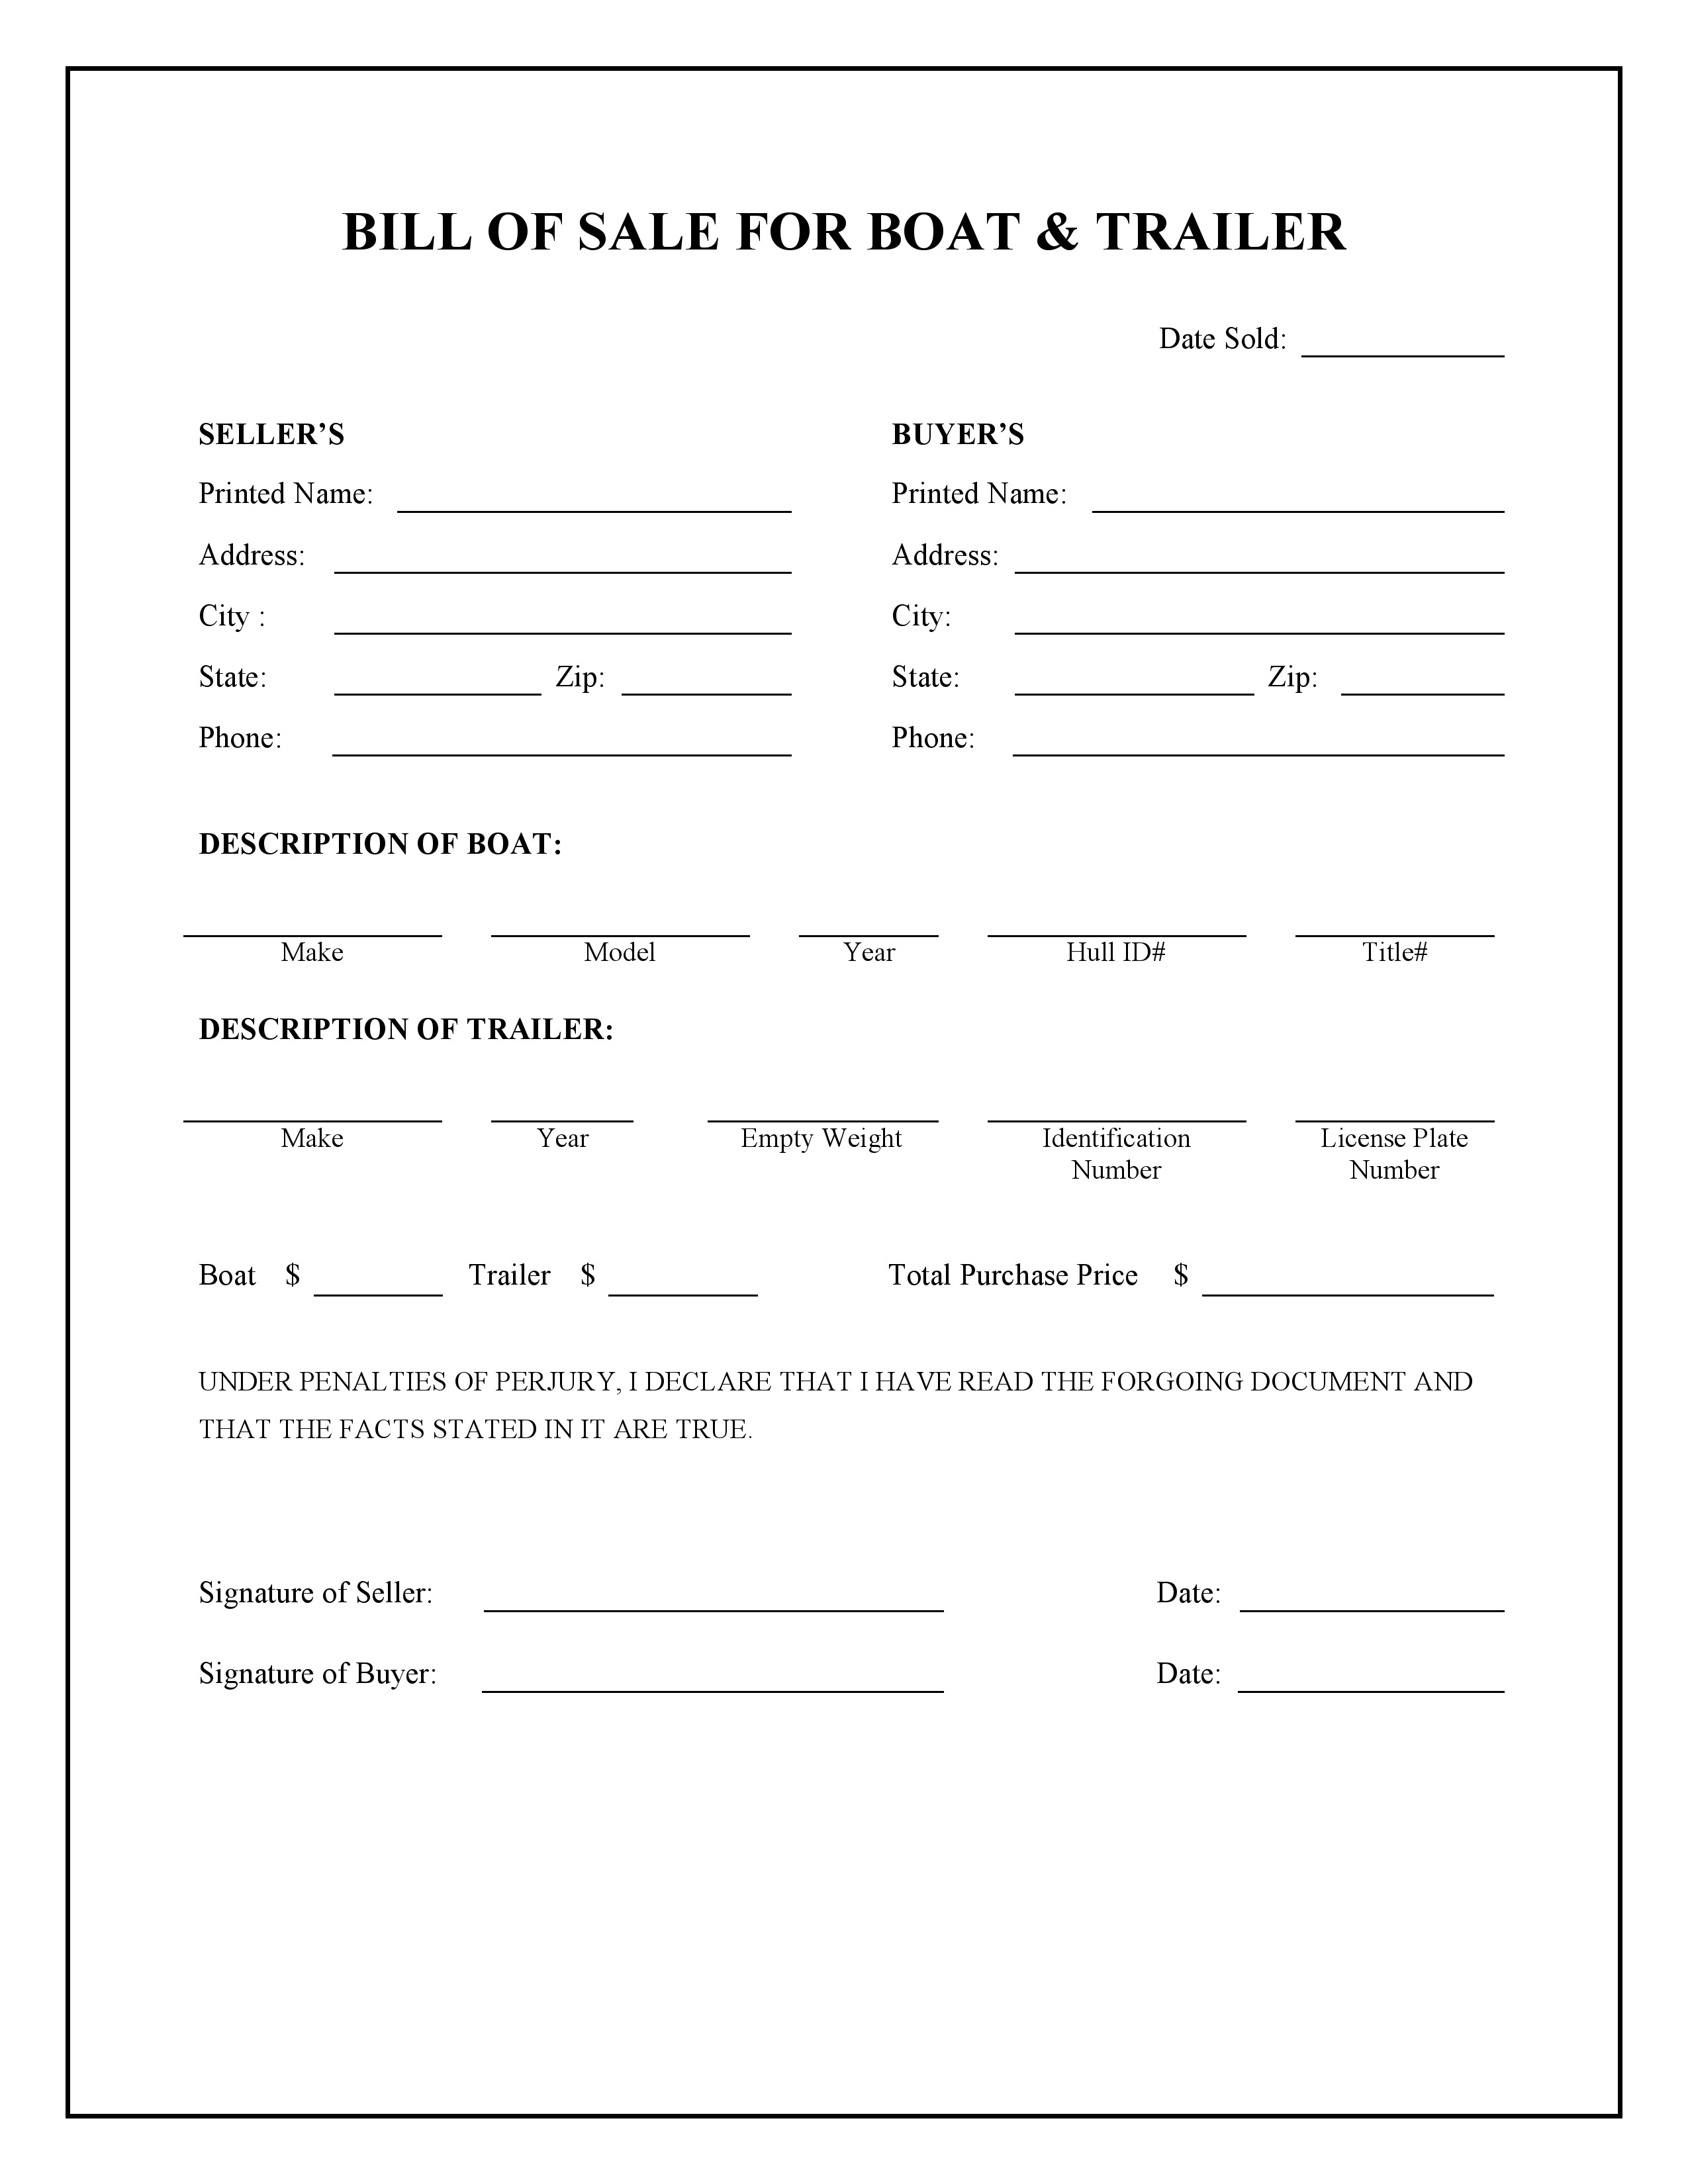 free boat and trailer bill of sale form pdf word do